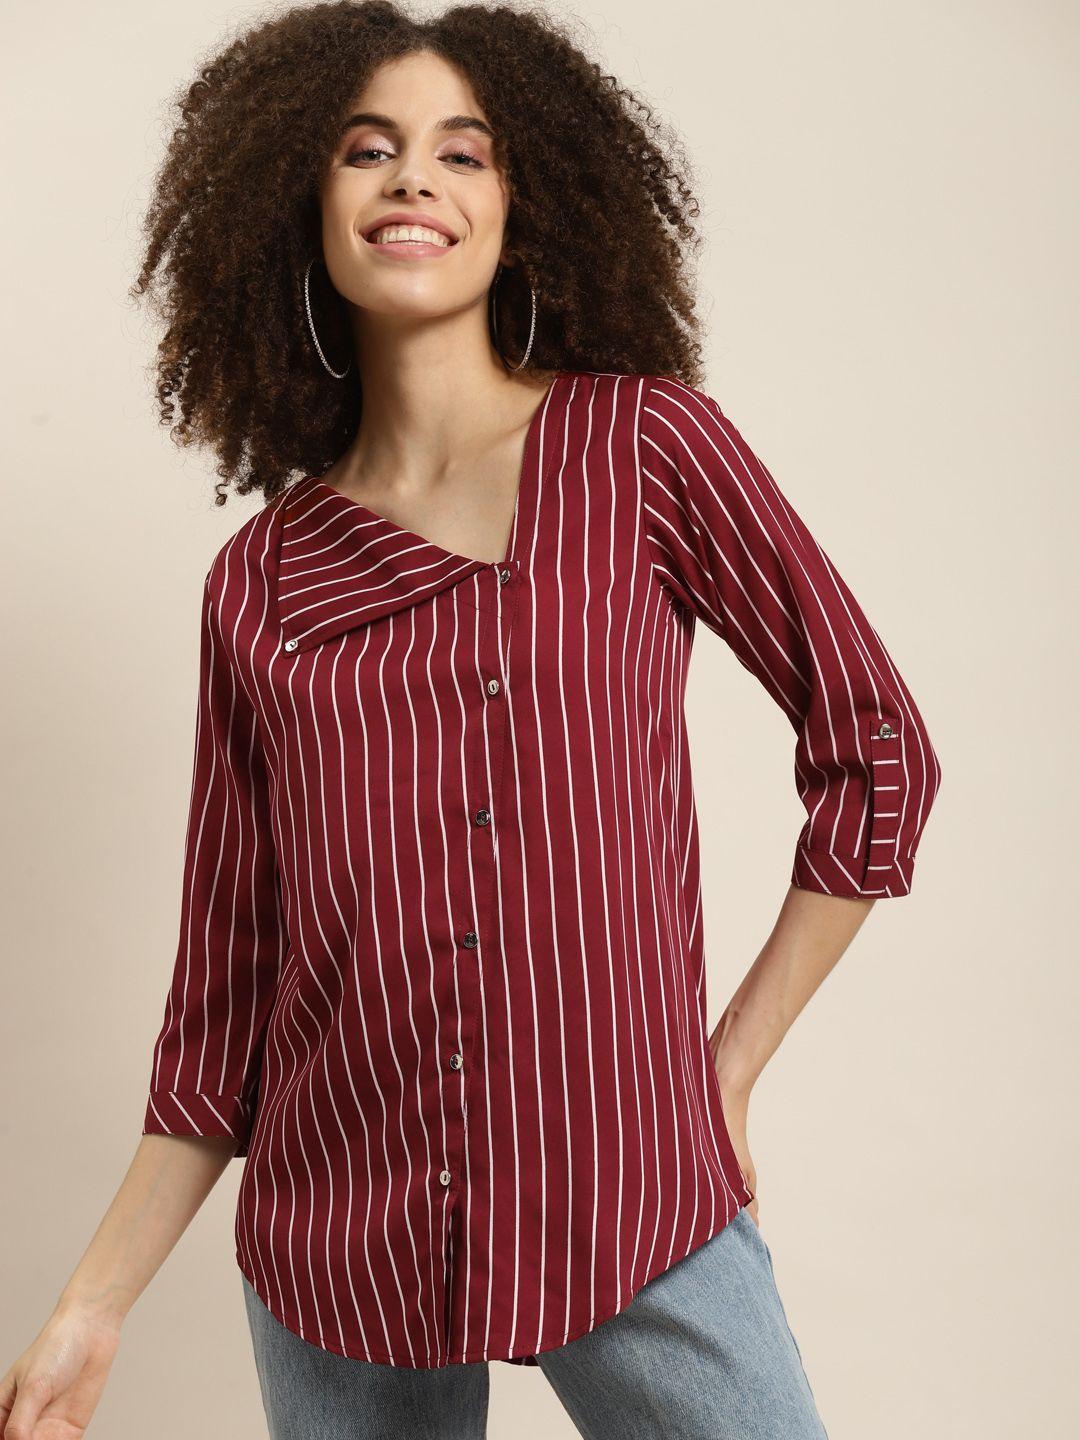 qurvii maroon & white striped roll-up sleeves crepe shirt style top